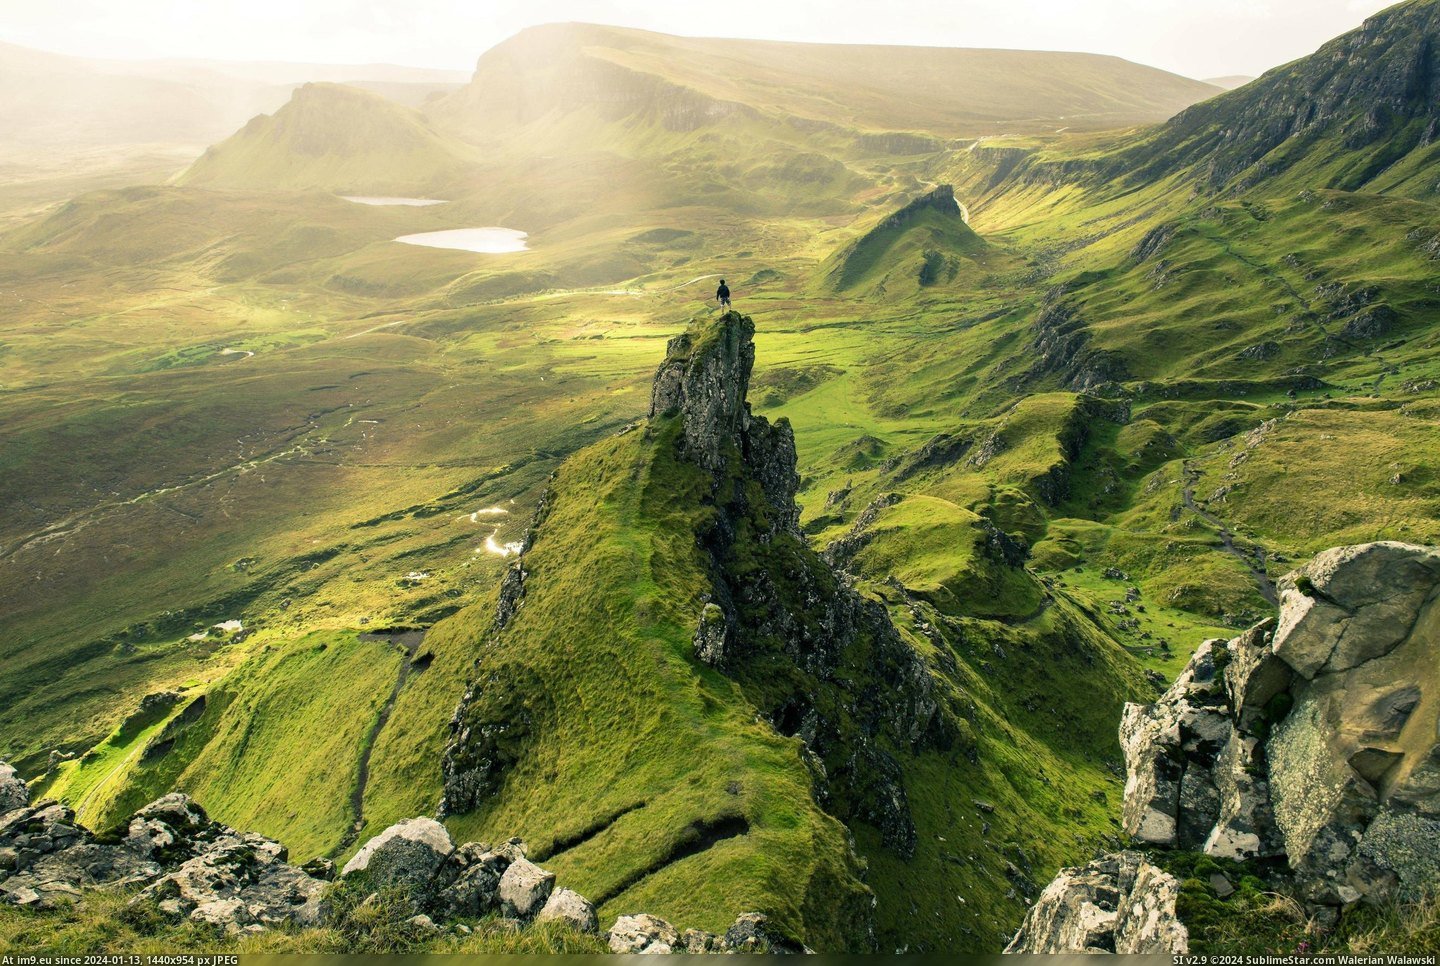 #Was #Area #Isle #Suggested #Quiraing #Skye #Scenery [Earthporn] I was suggested to post this here. This is the Quiraing area of the Isle of Skye, with me taking in the scenery. [26 Pic. (Изображение из альбом My r/EARTHPORN favs))